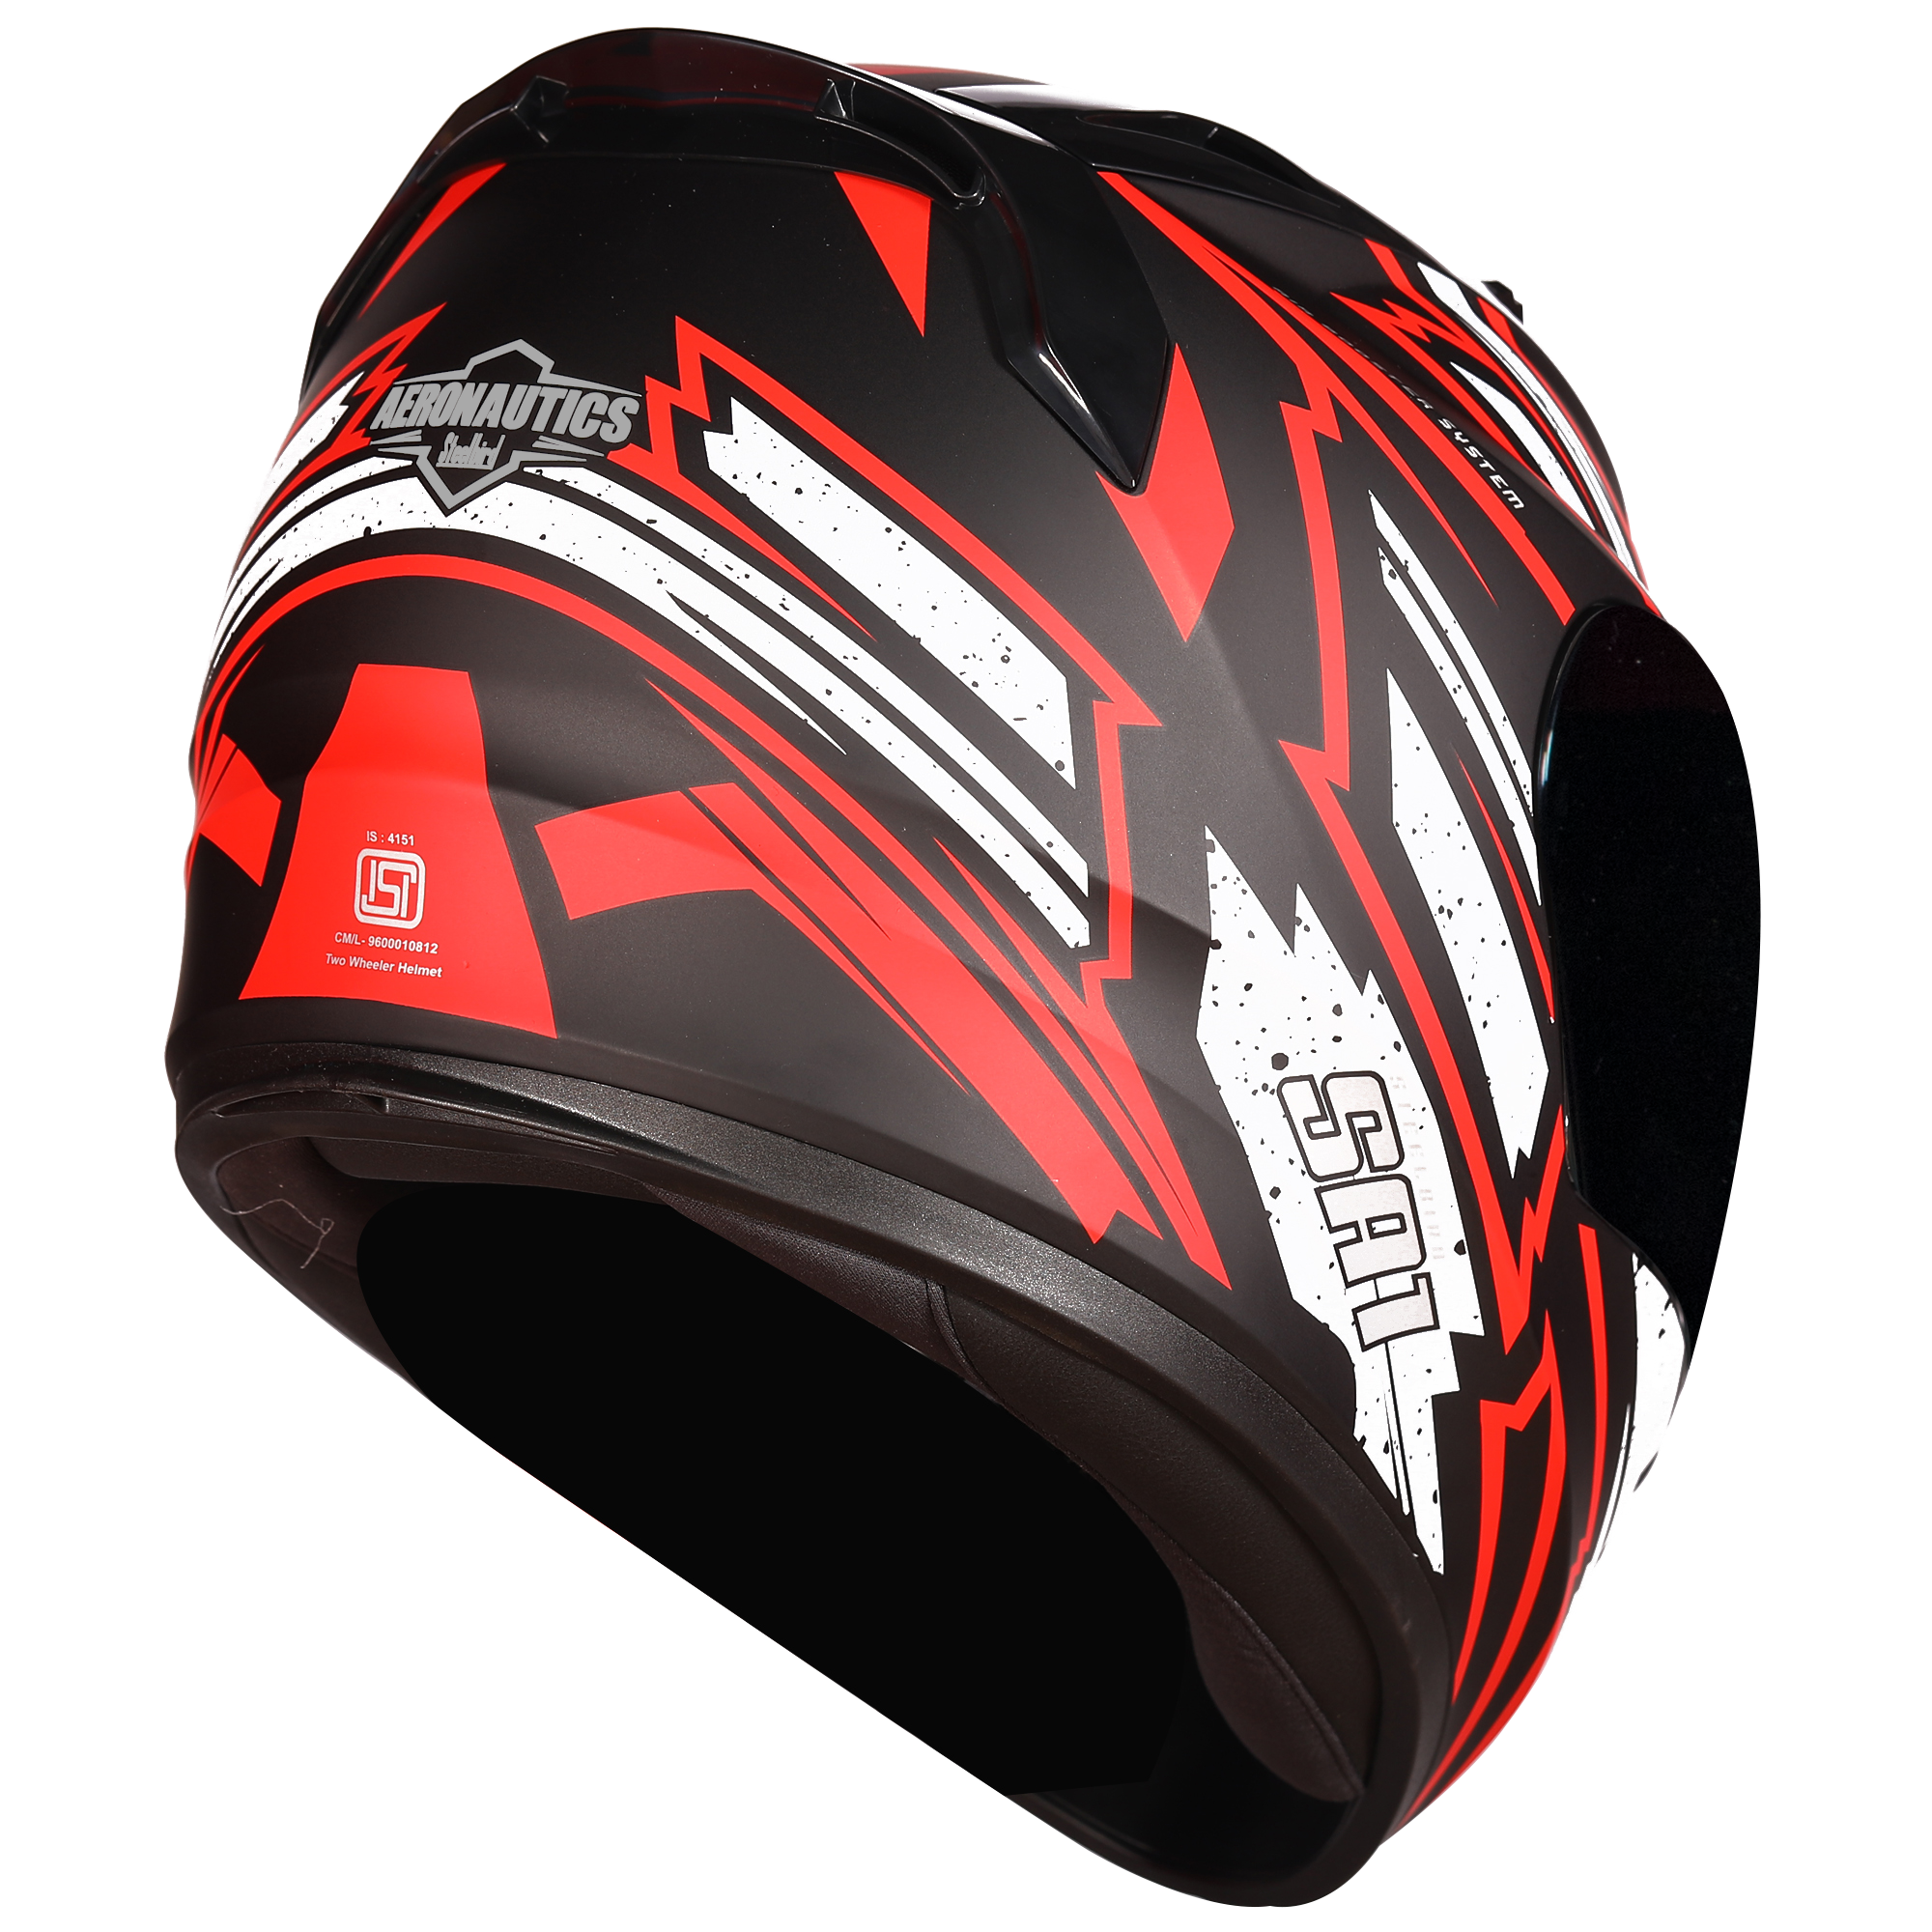 SA-1 BOOSTER MAT BLACK WITH RED - SMOKE VISOR (WITH EXTRA CLEAR VISOR)